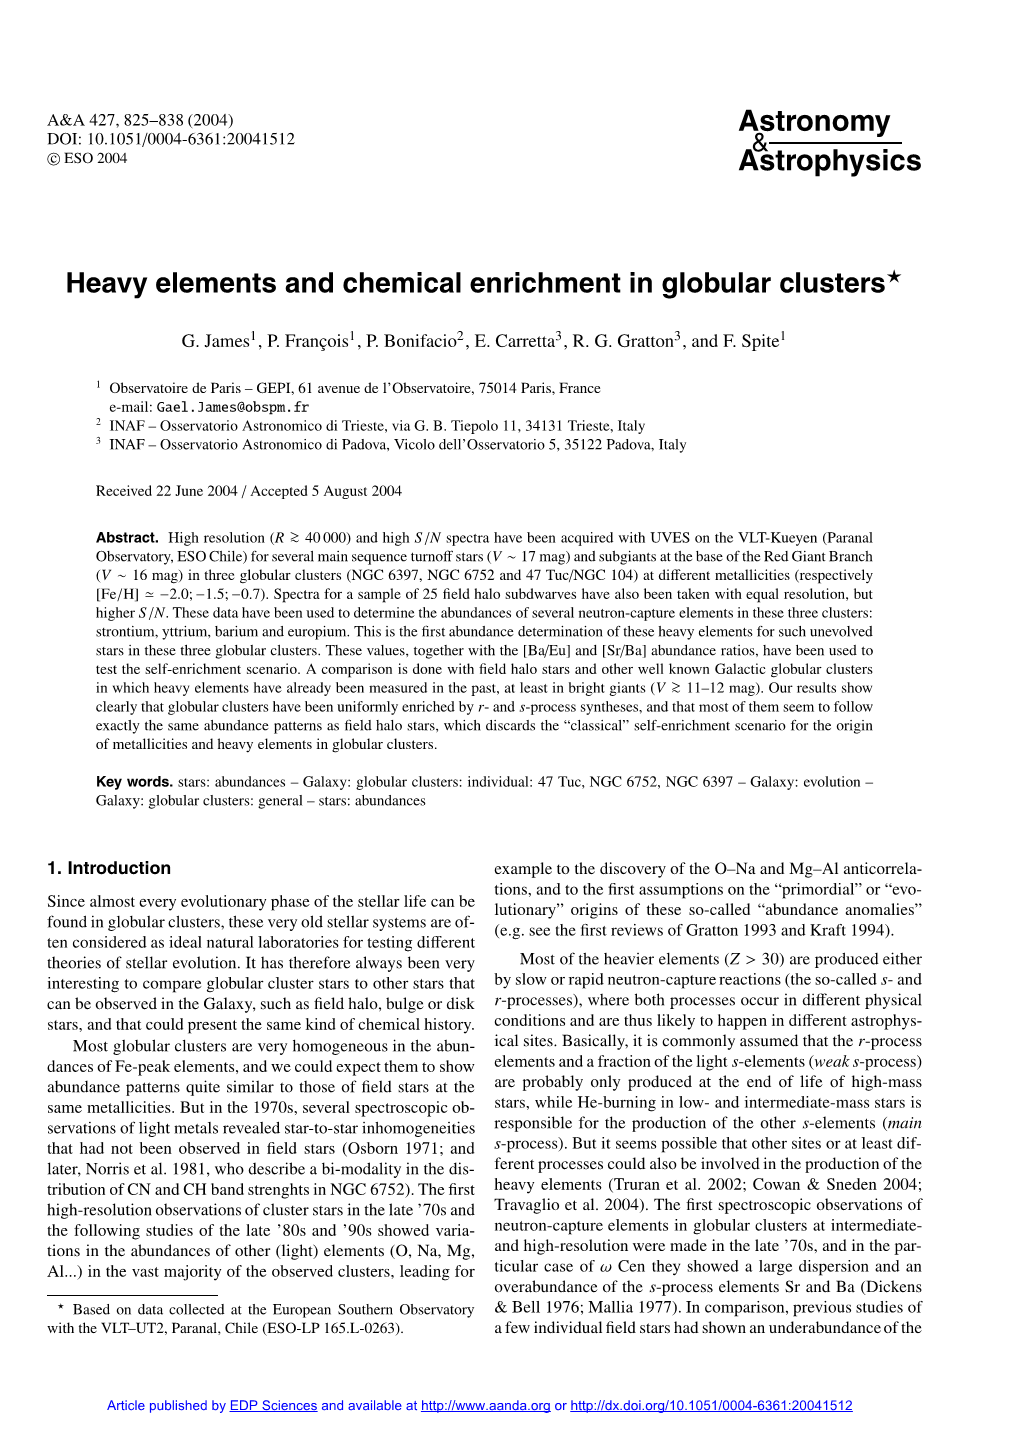 Heavy Elements and Chemical Enrichment in Globular Clusters